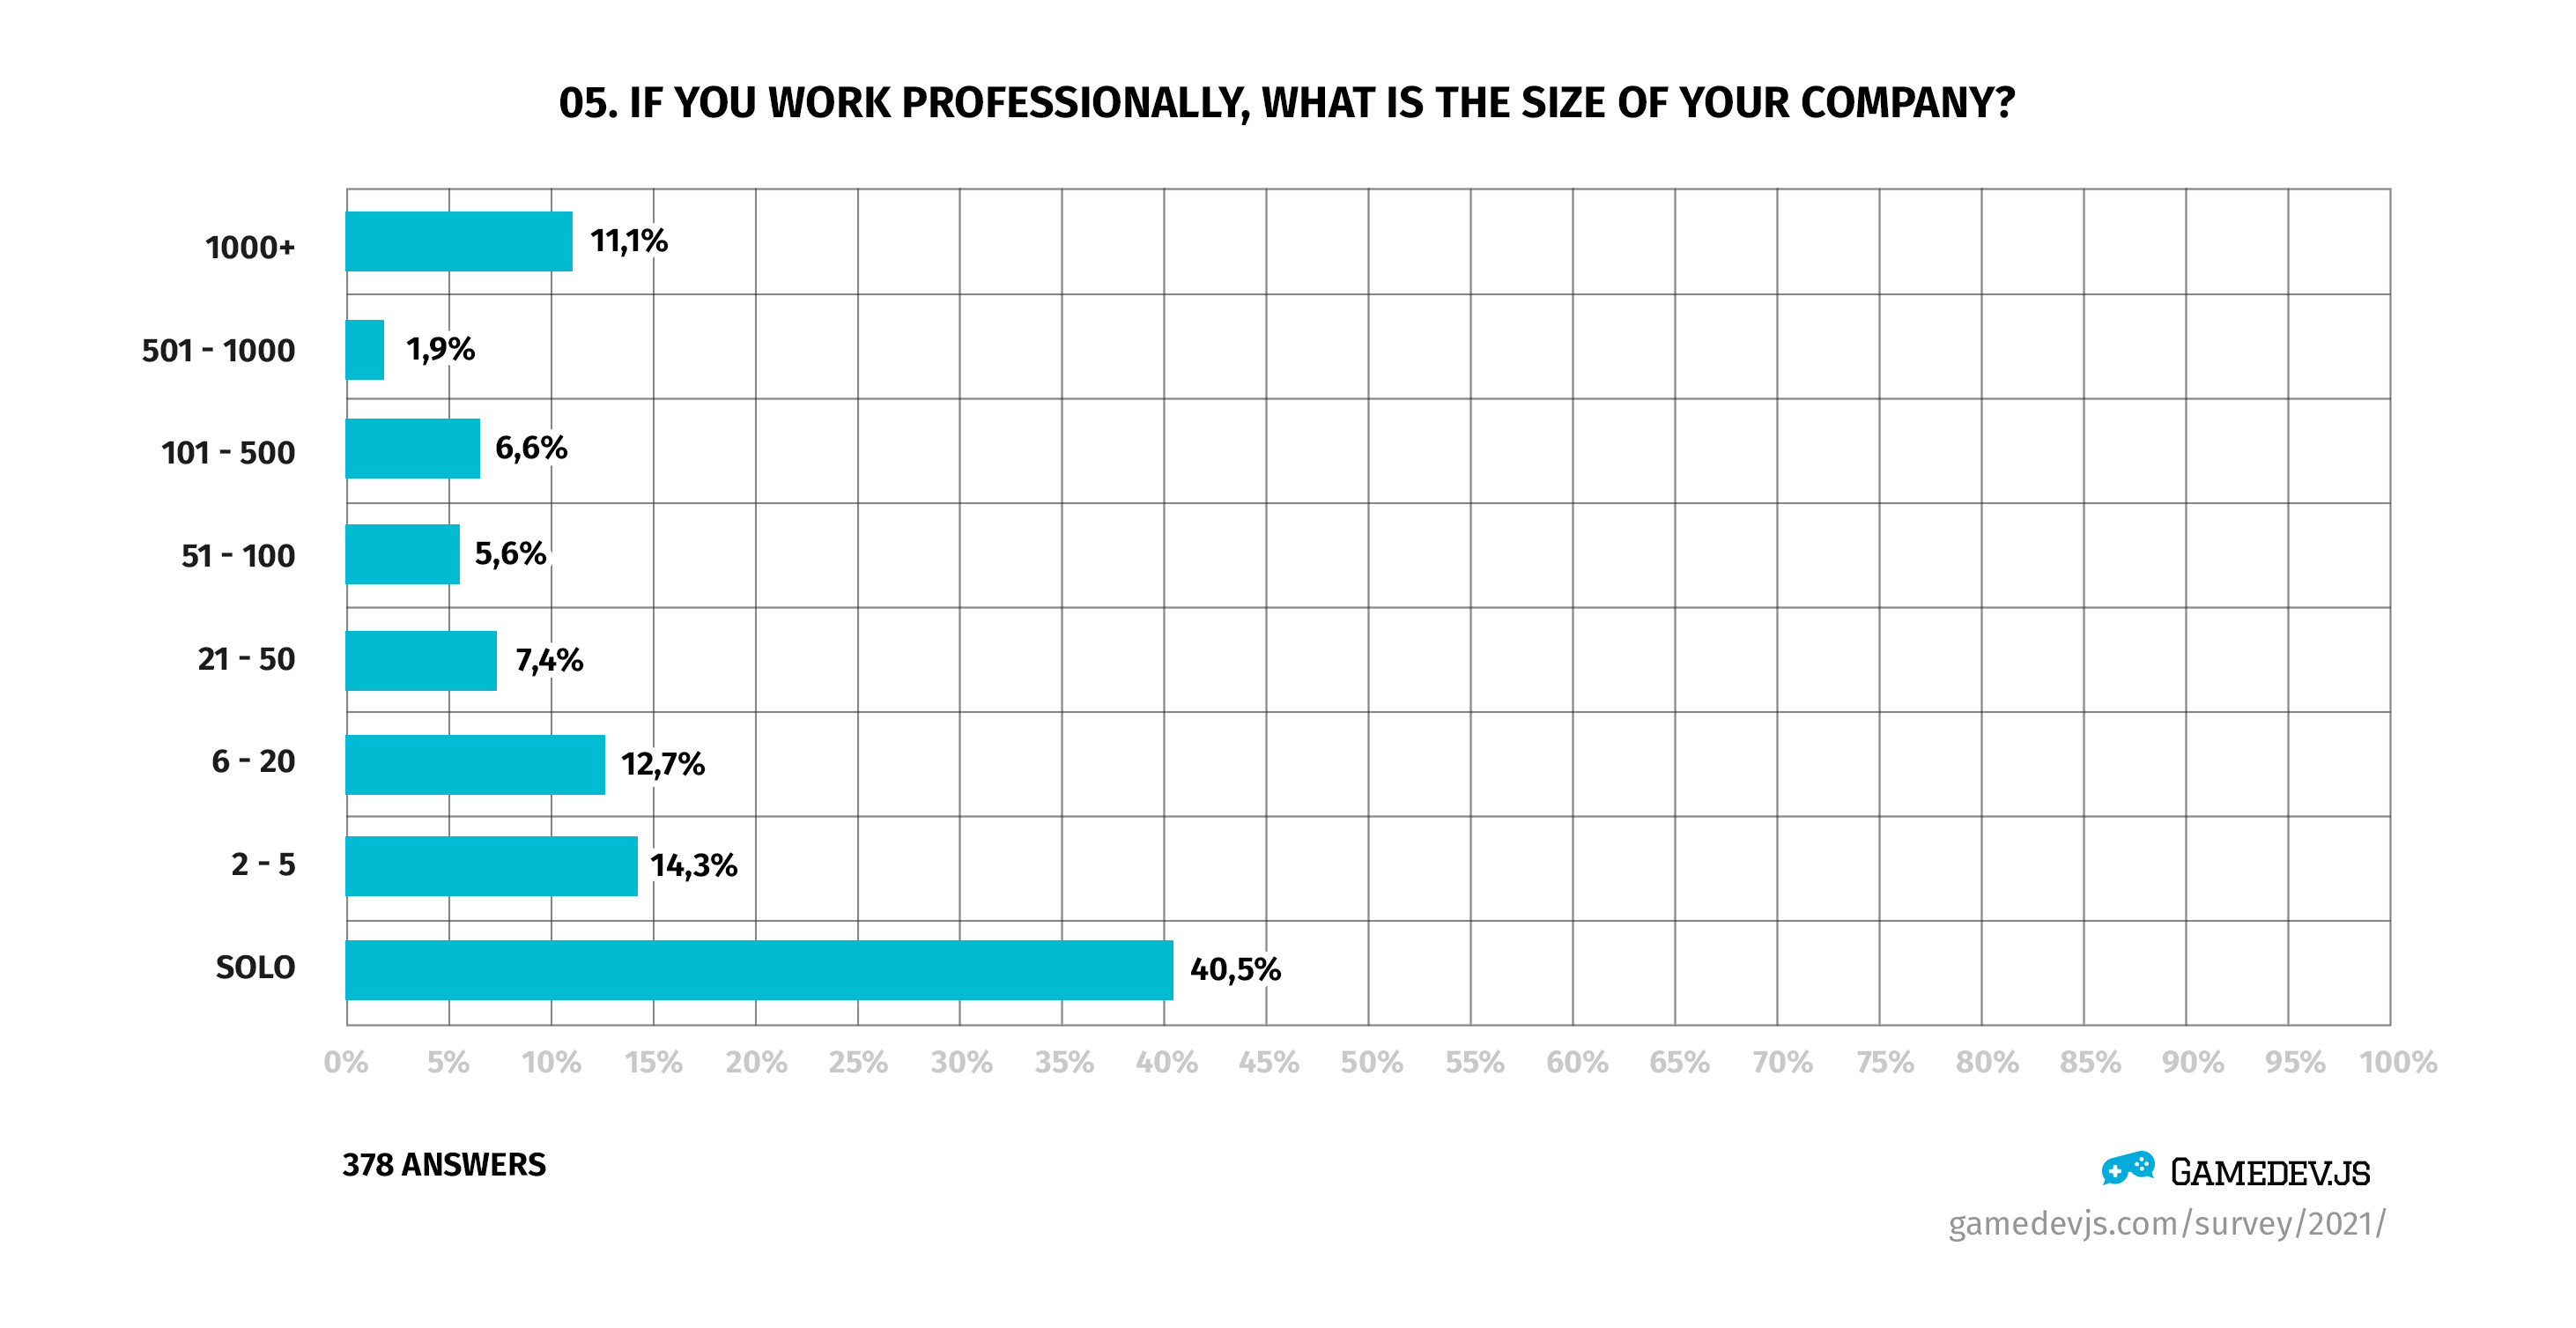 Gamedev.js Survey 2021 - Question #5: If you work professionally, what is the size of your company?